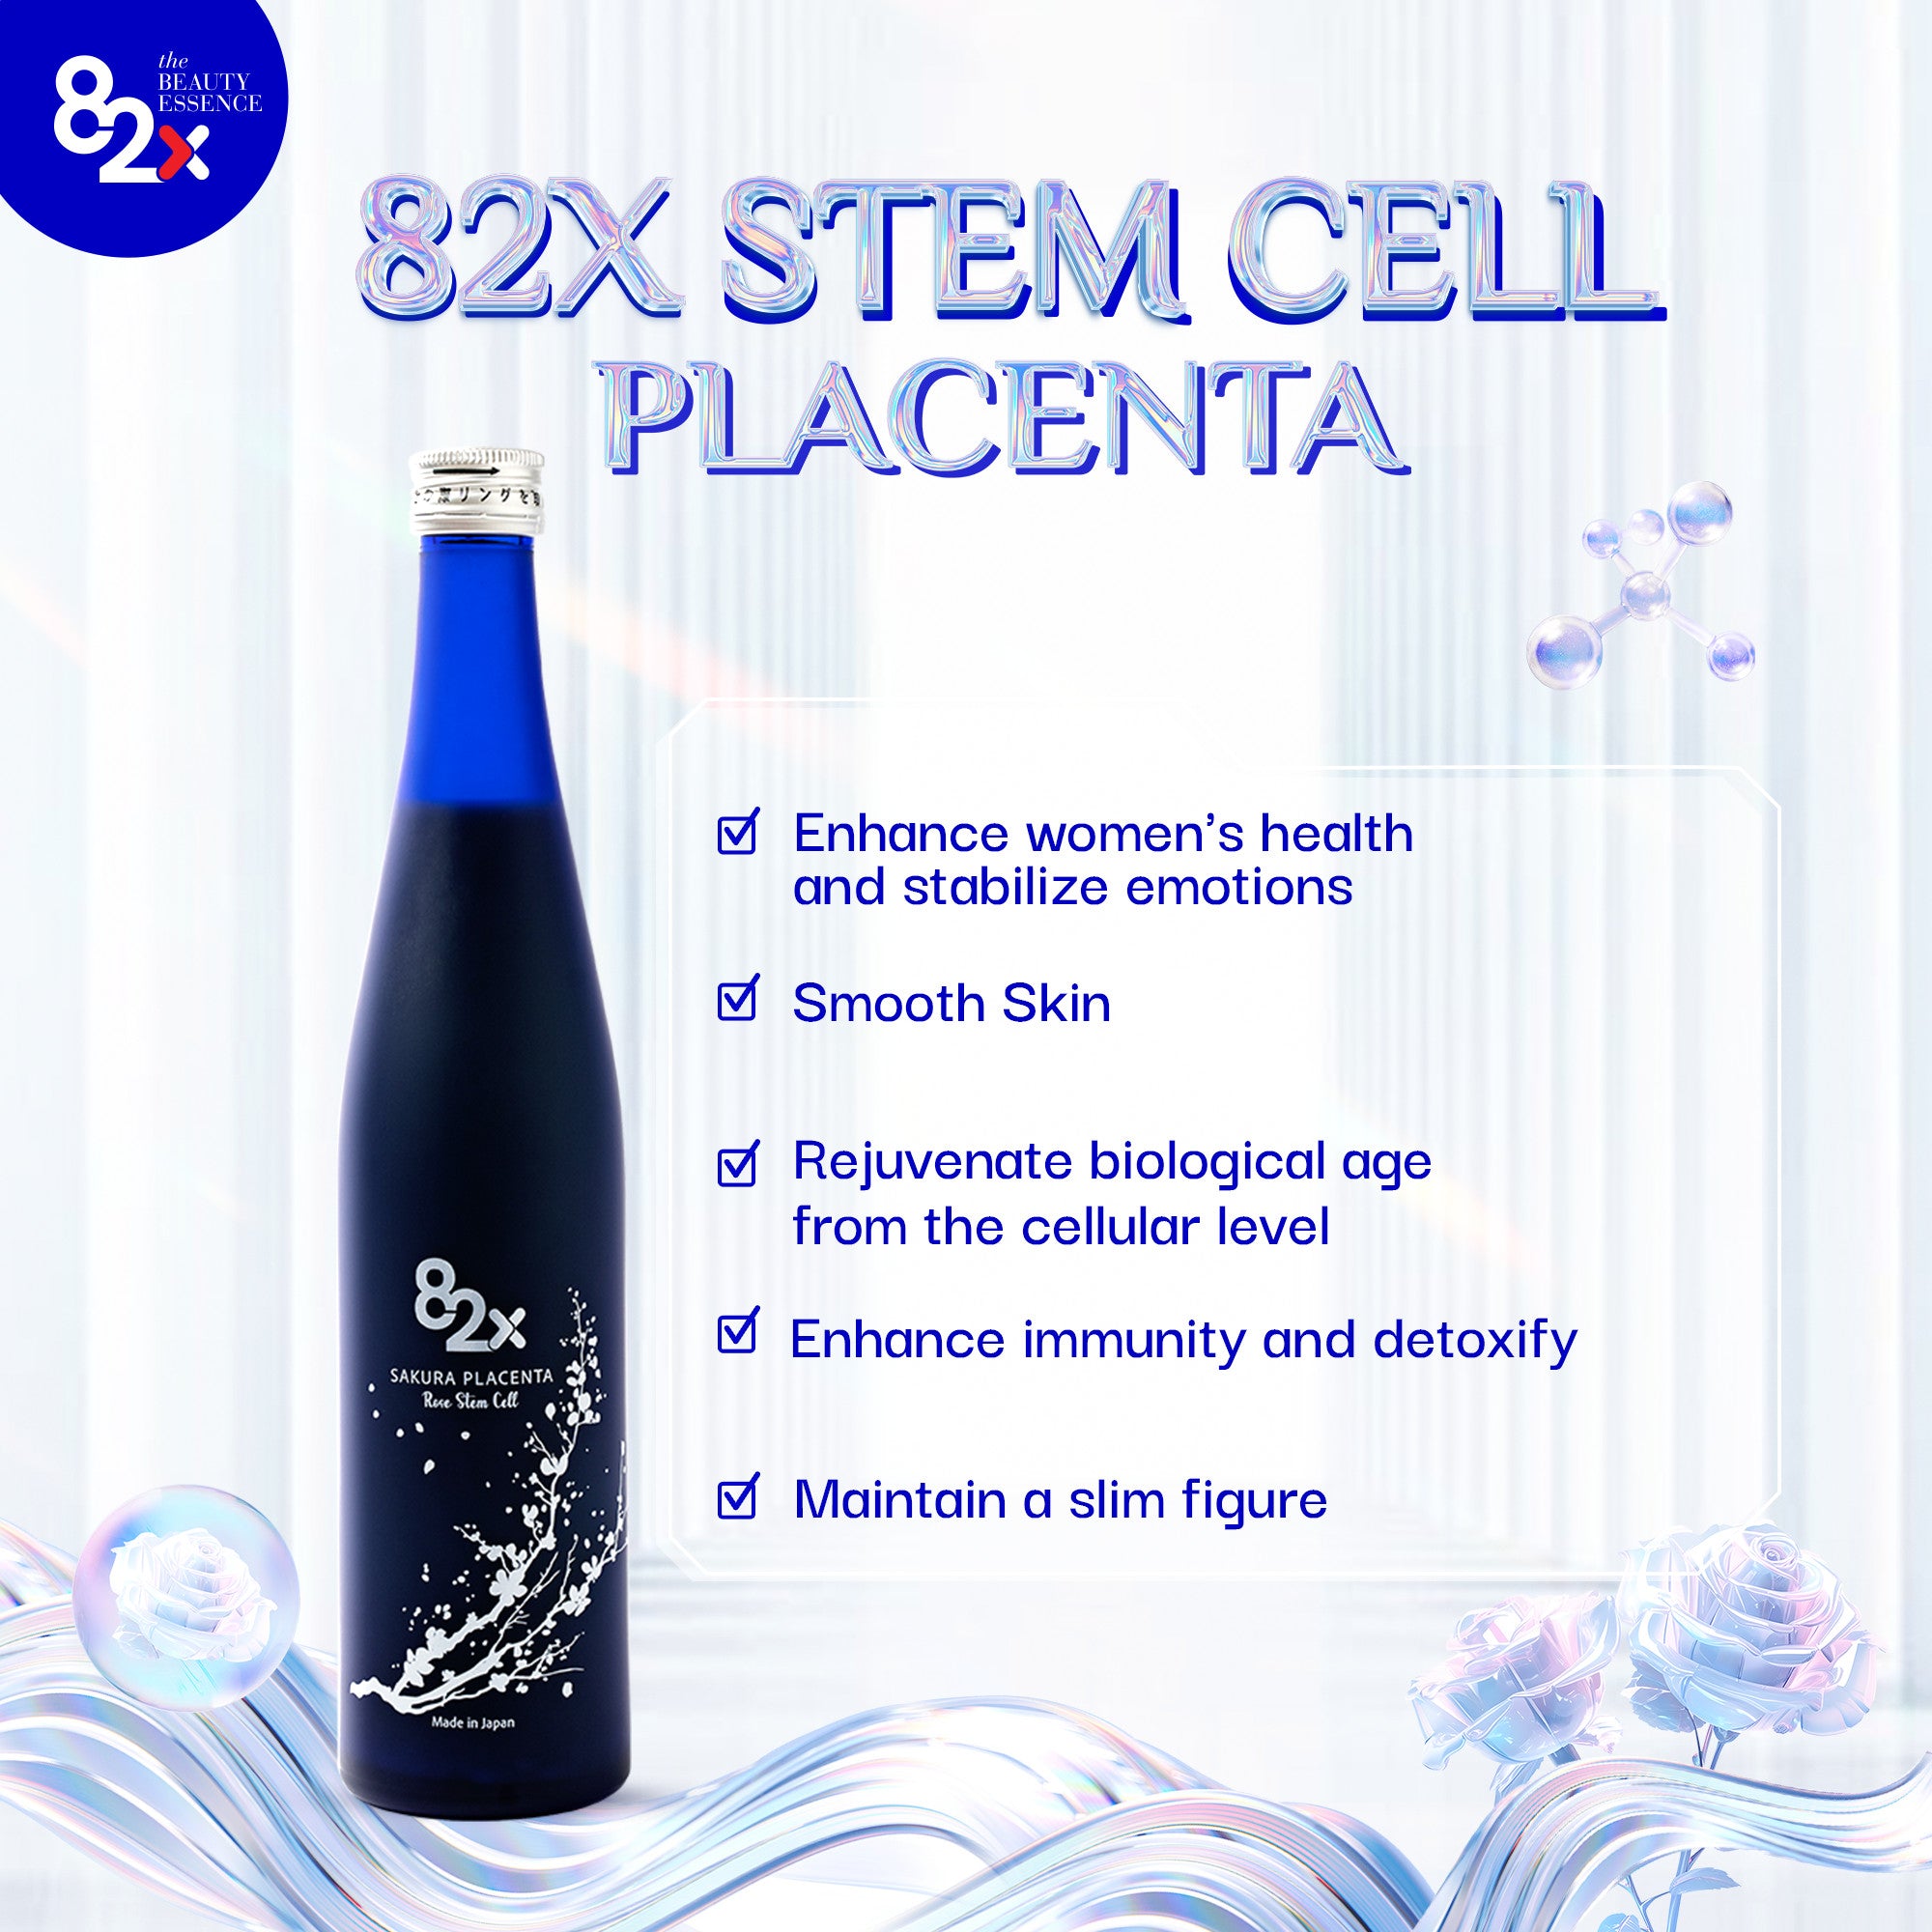 82X Stem Cell Placenta- Fish collagen peptide from marine (500ml 